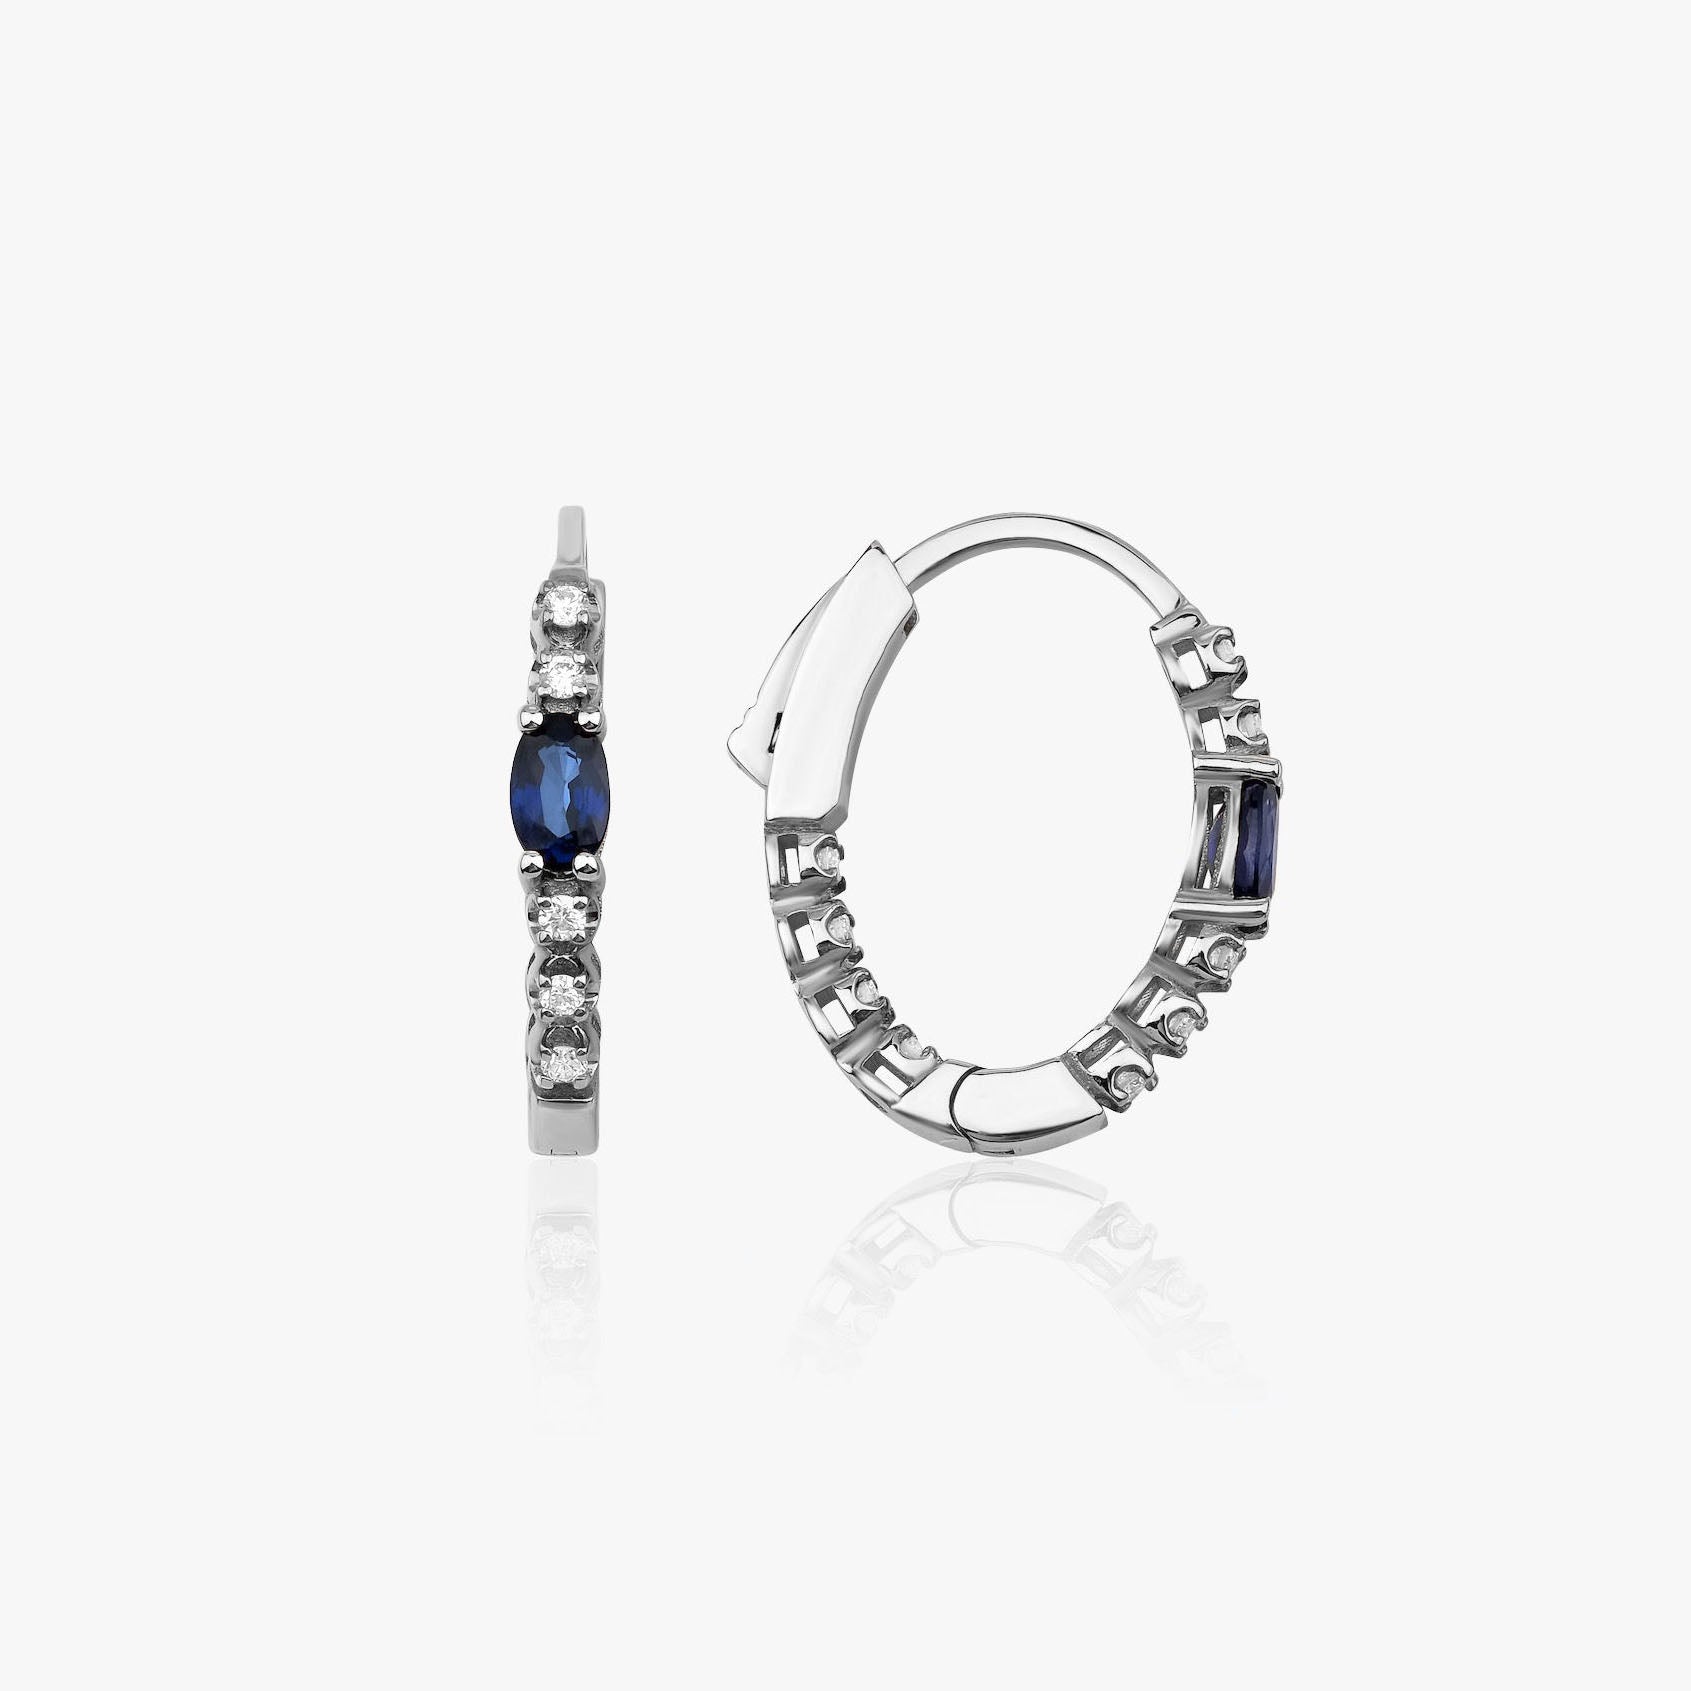 Oval Cut Blue Sapphire and Diamond Hoop Earrings Available in 14K and 18K Gold